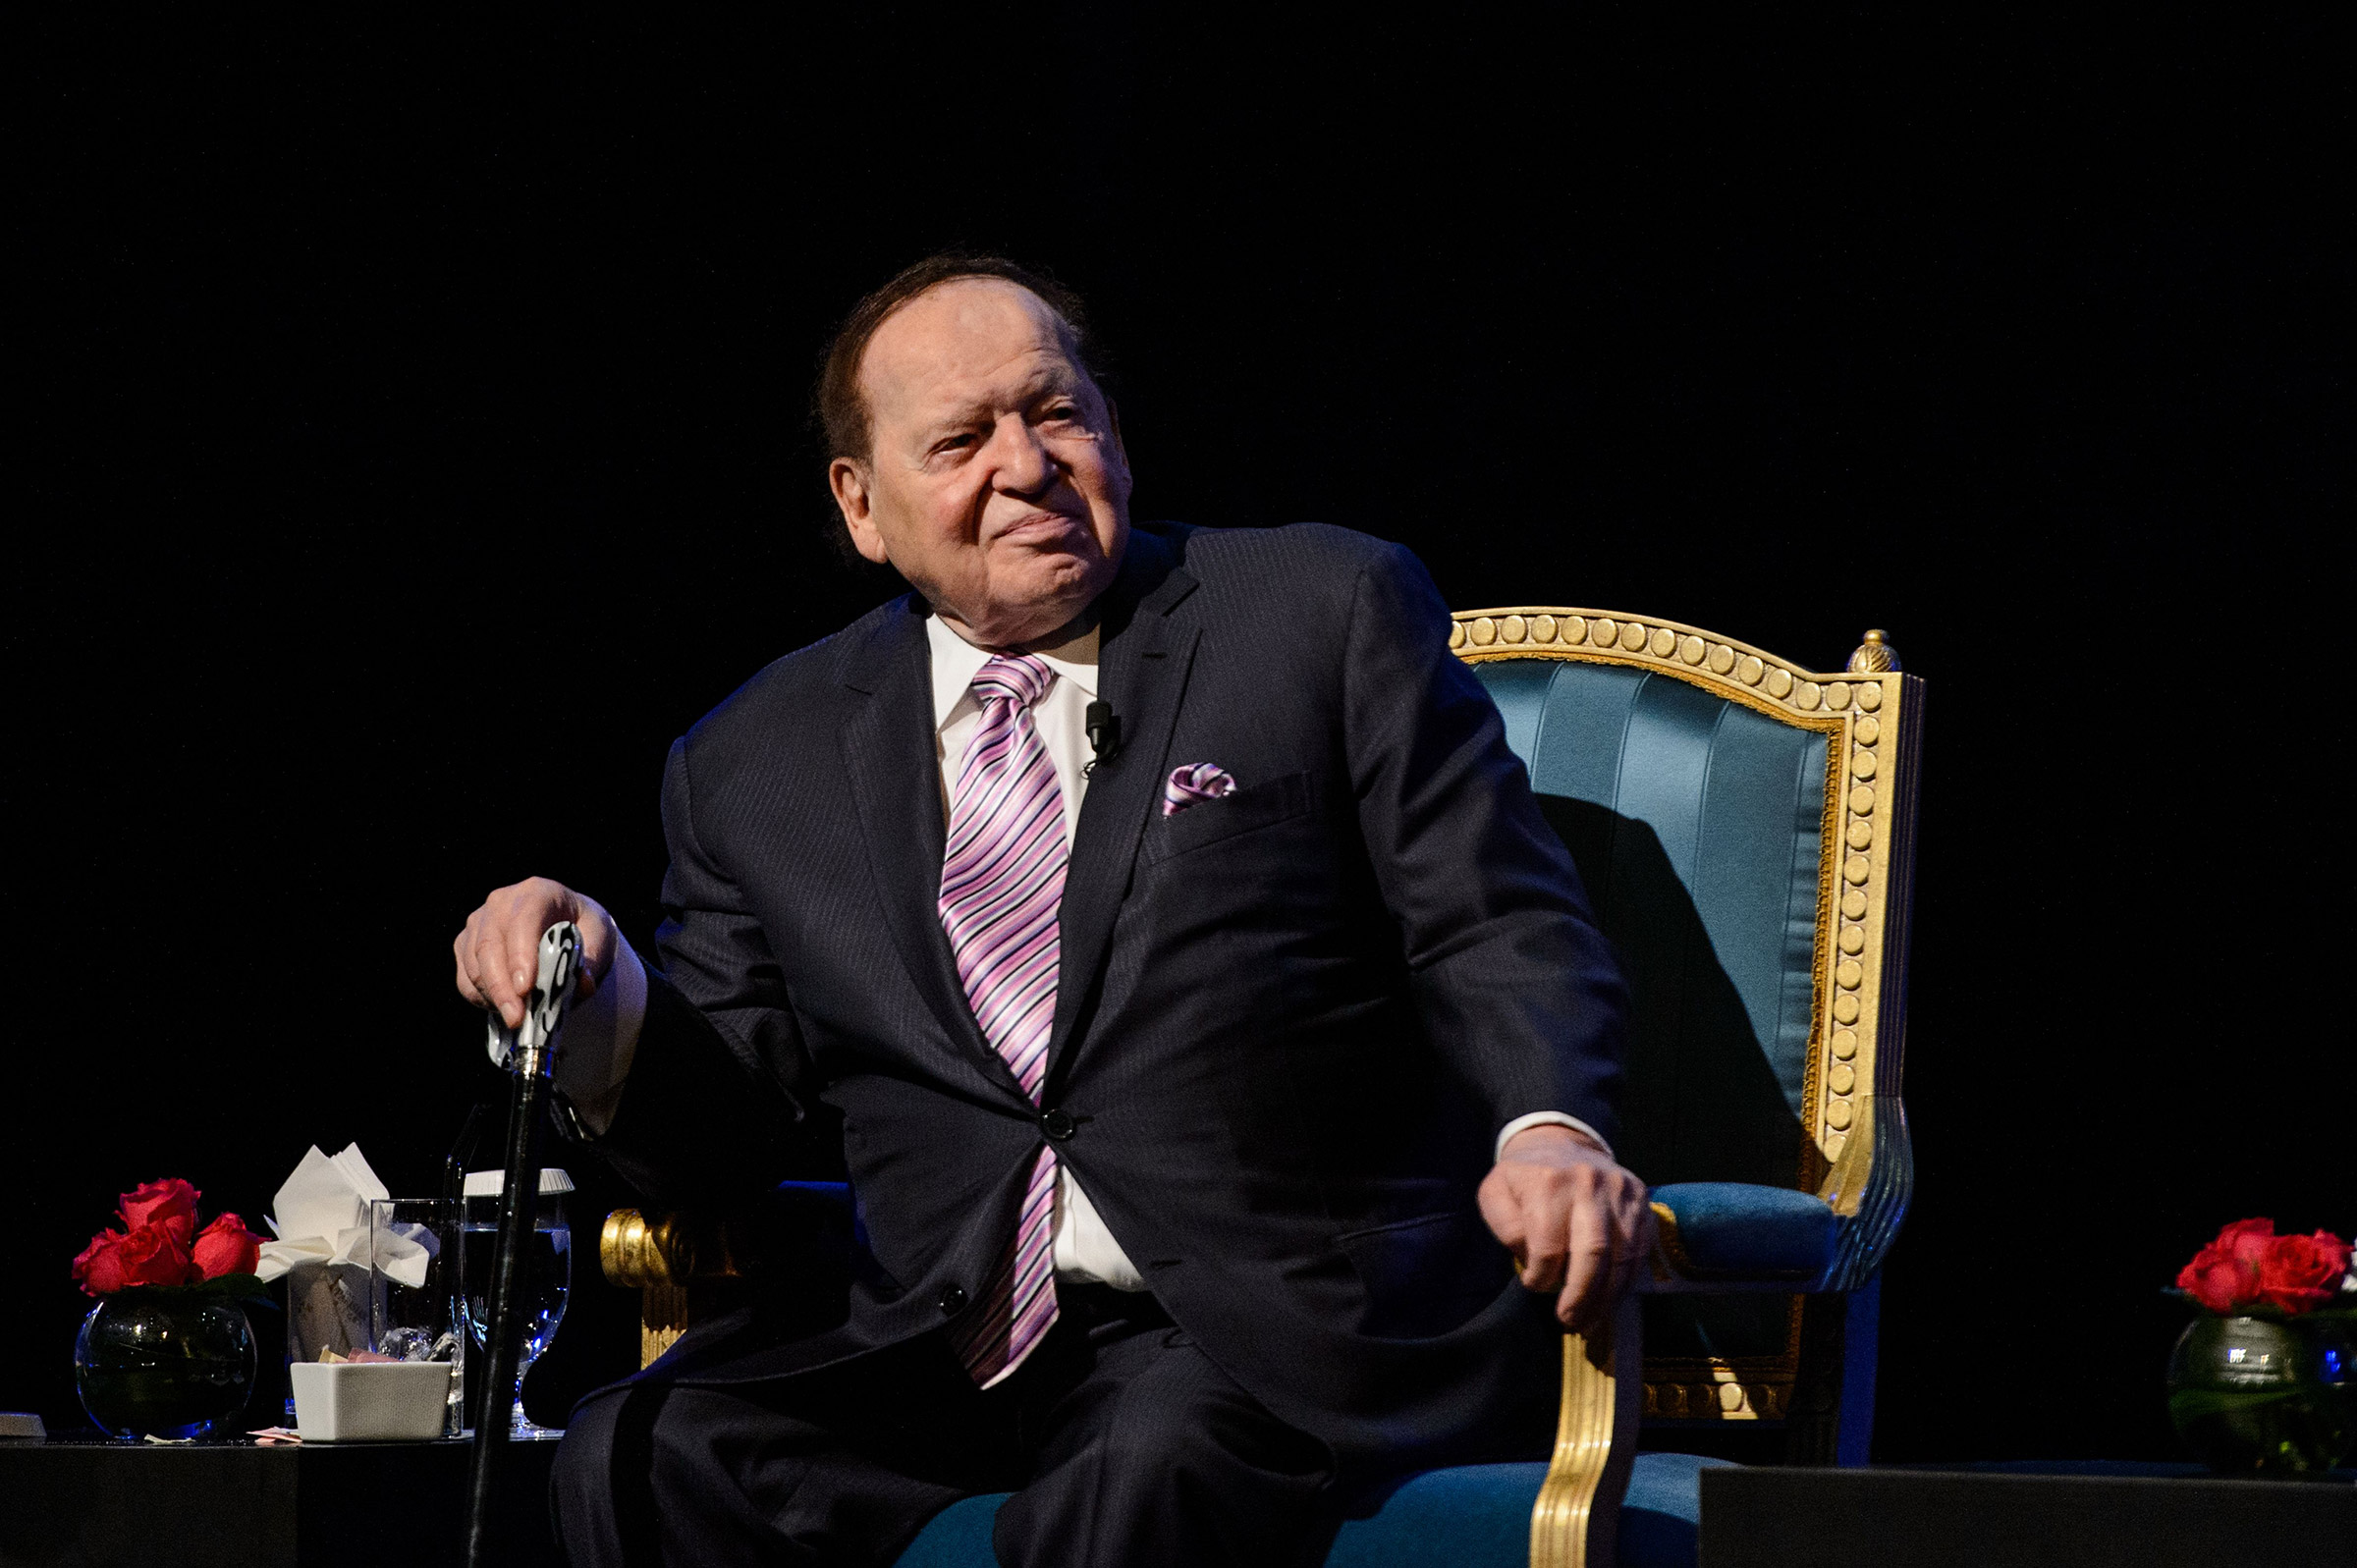 Chairman and chief executive officer of the Las Vegas Sands Corporation Sheldon Adelson attends a press conference in Macau, on Sept. 13, 2016. (Anthony Wallace—AFP/Getty Images)